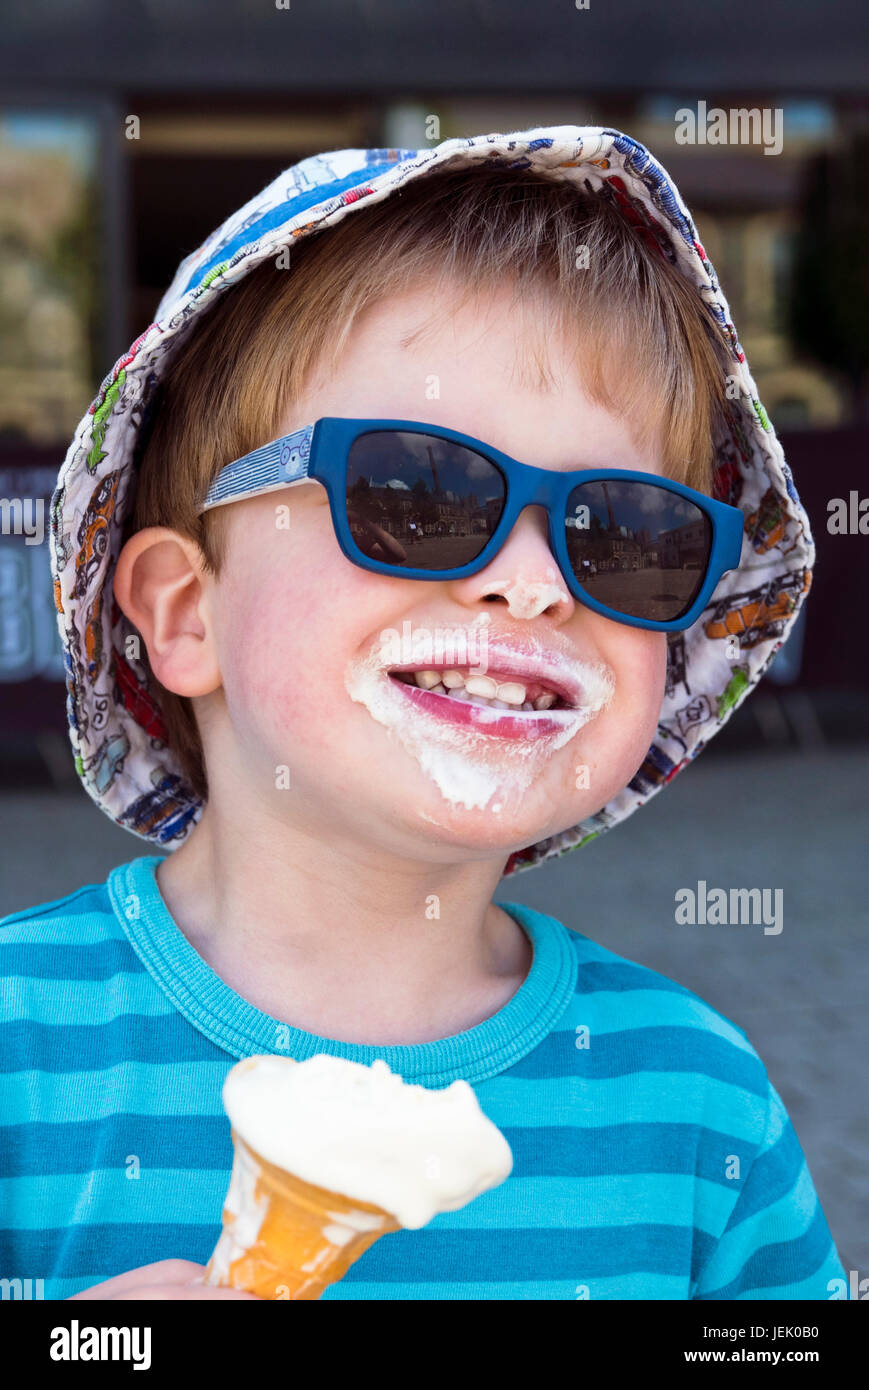 Young boy wearing sunglasses and eating ice cream Stock Photo